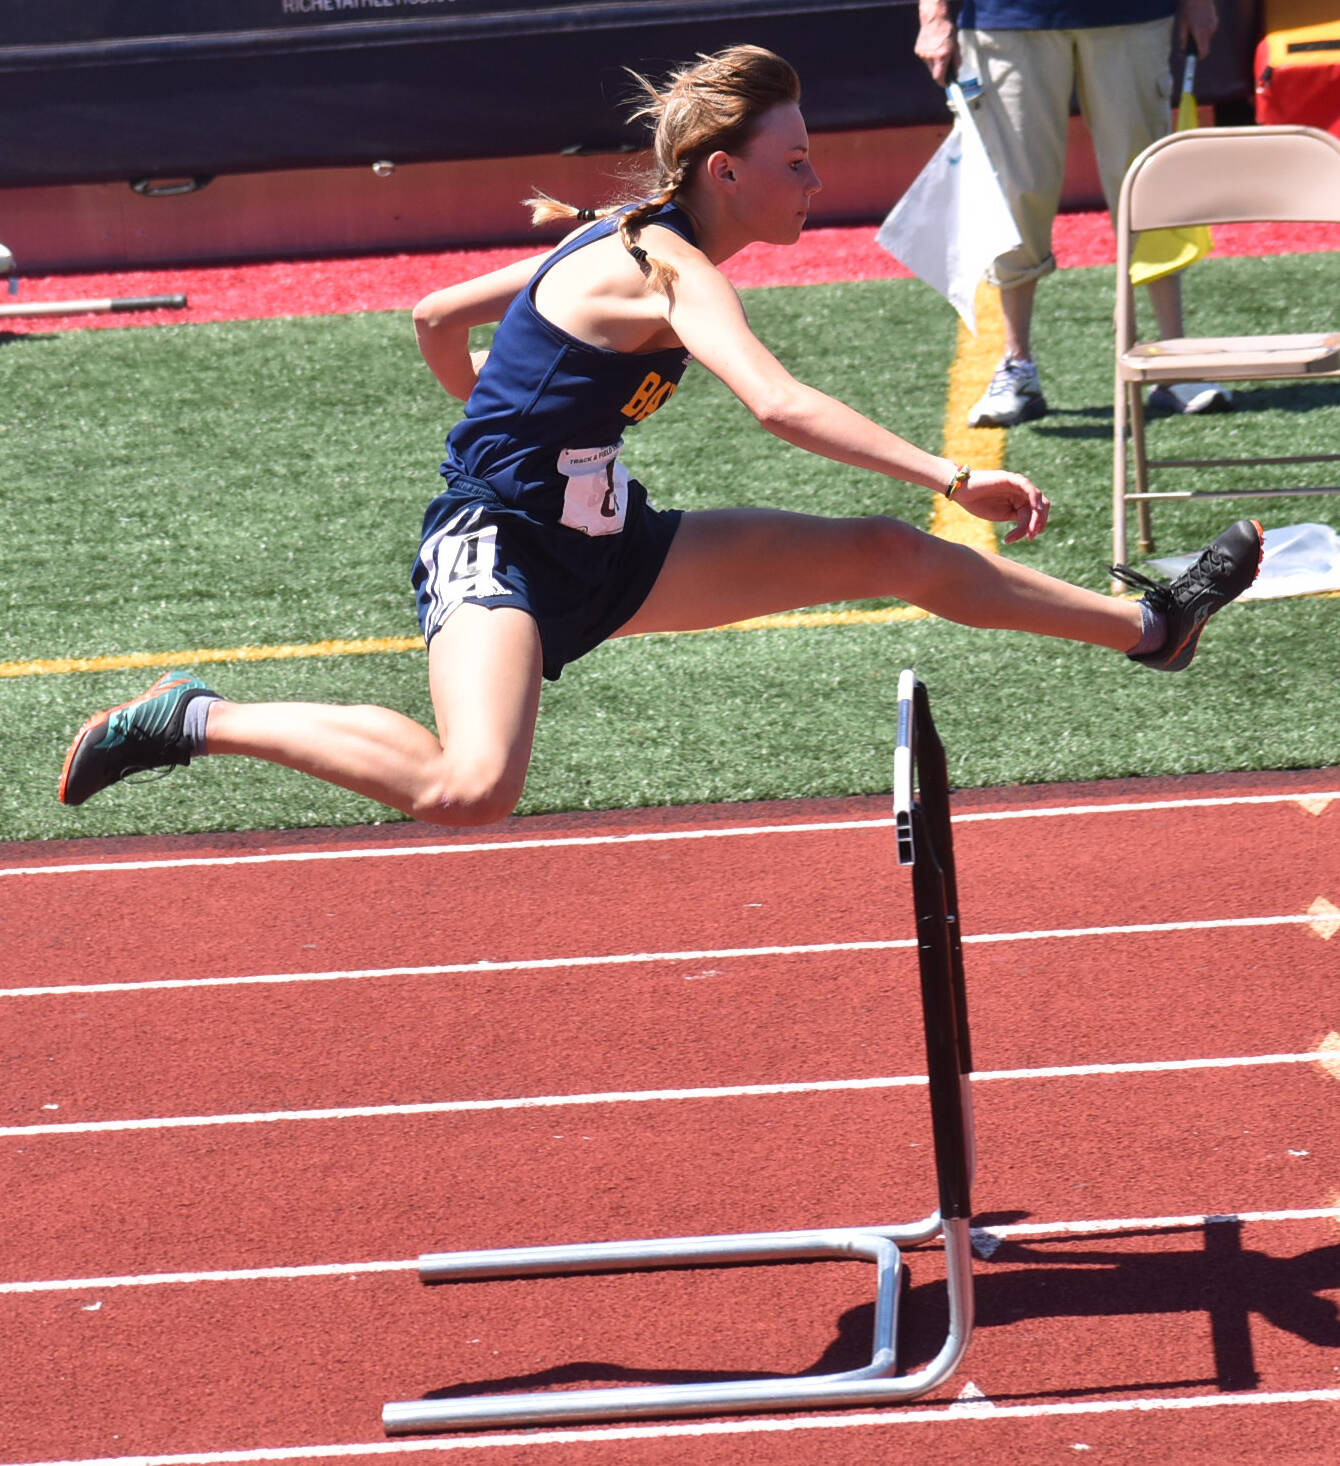 Bainbridge Claire Hungerford finished 7th in the 100 hurdles.